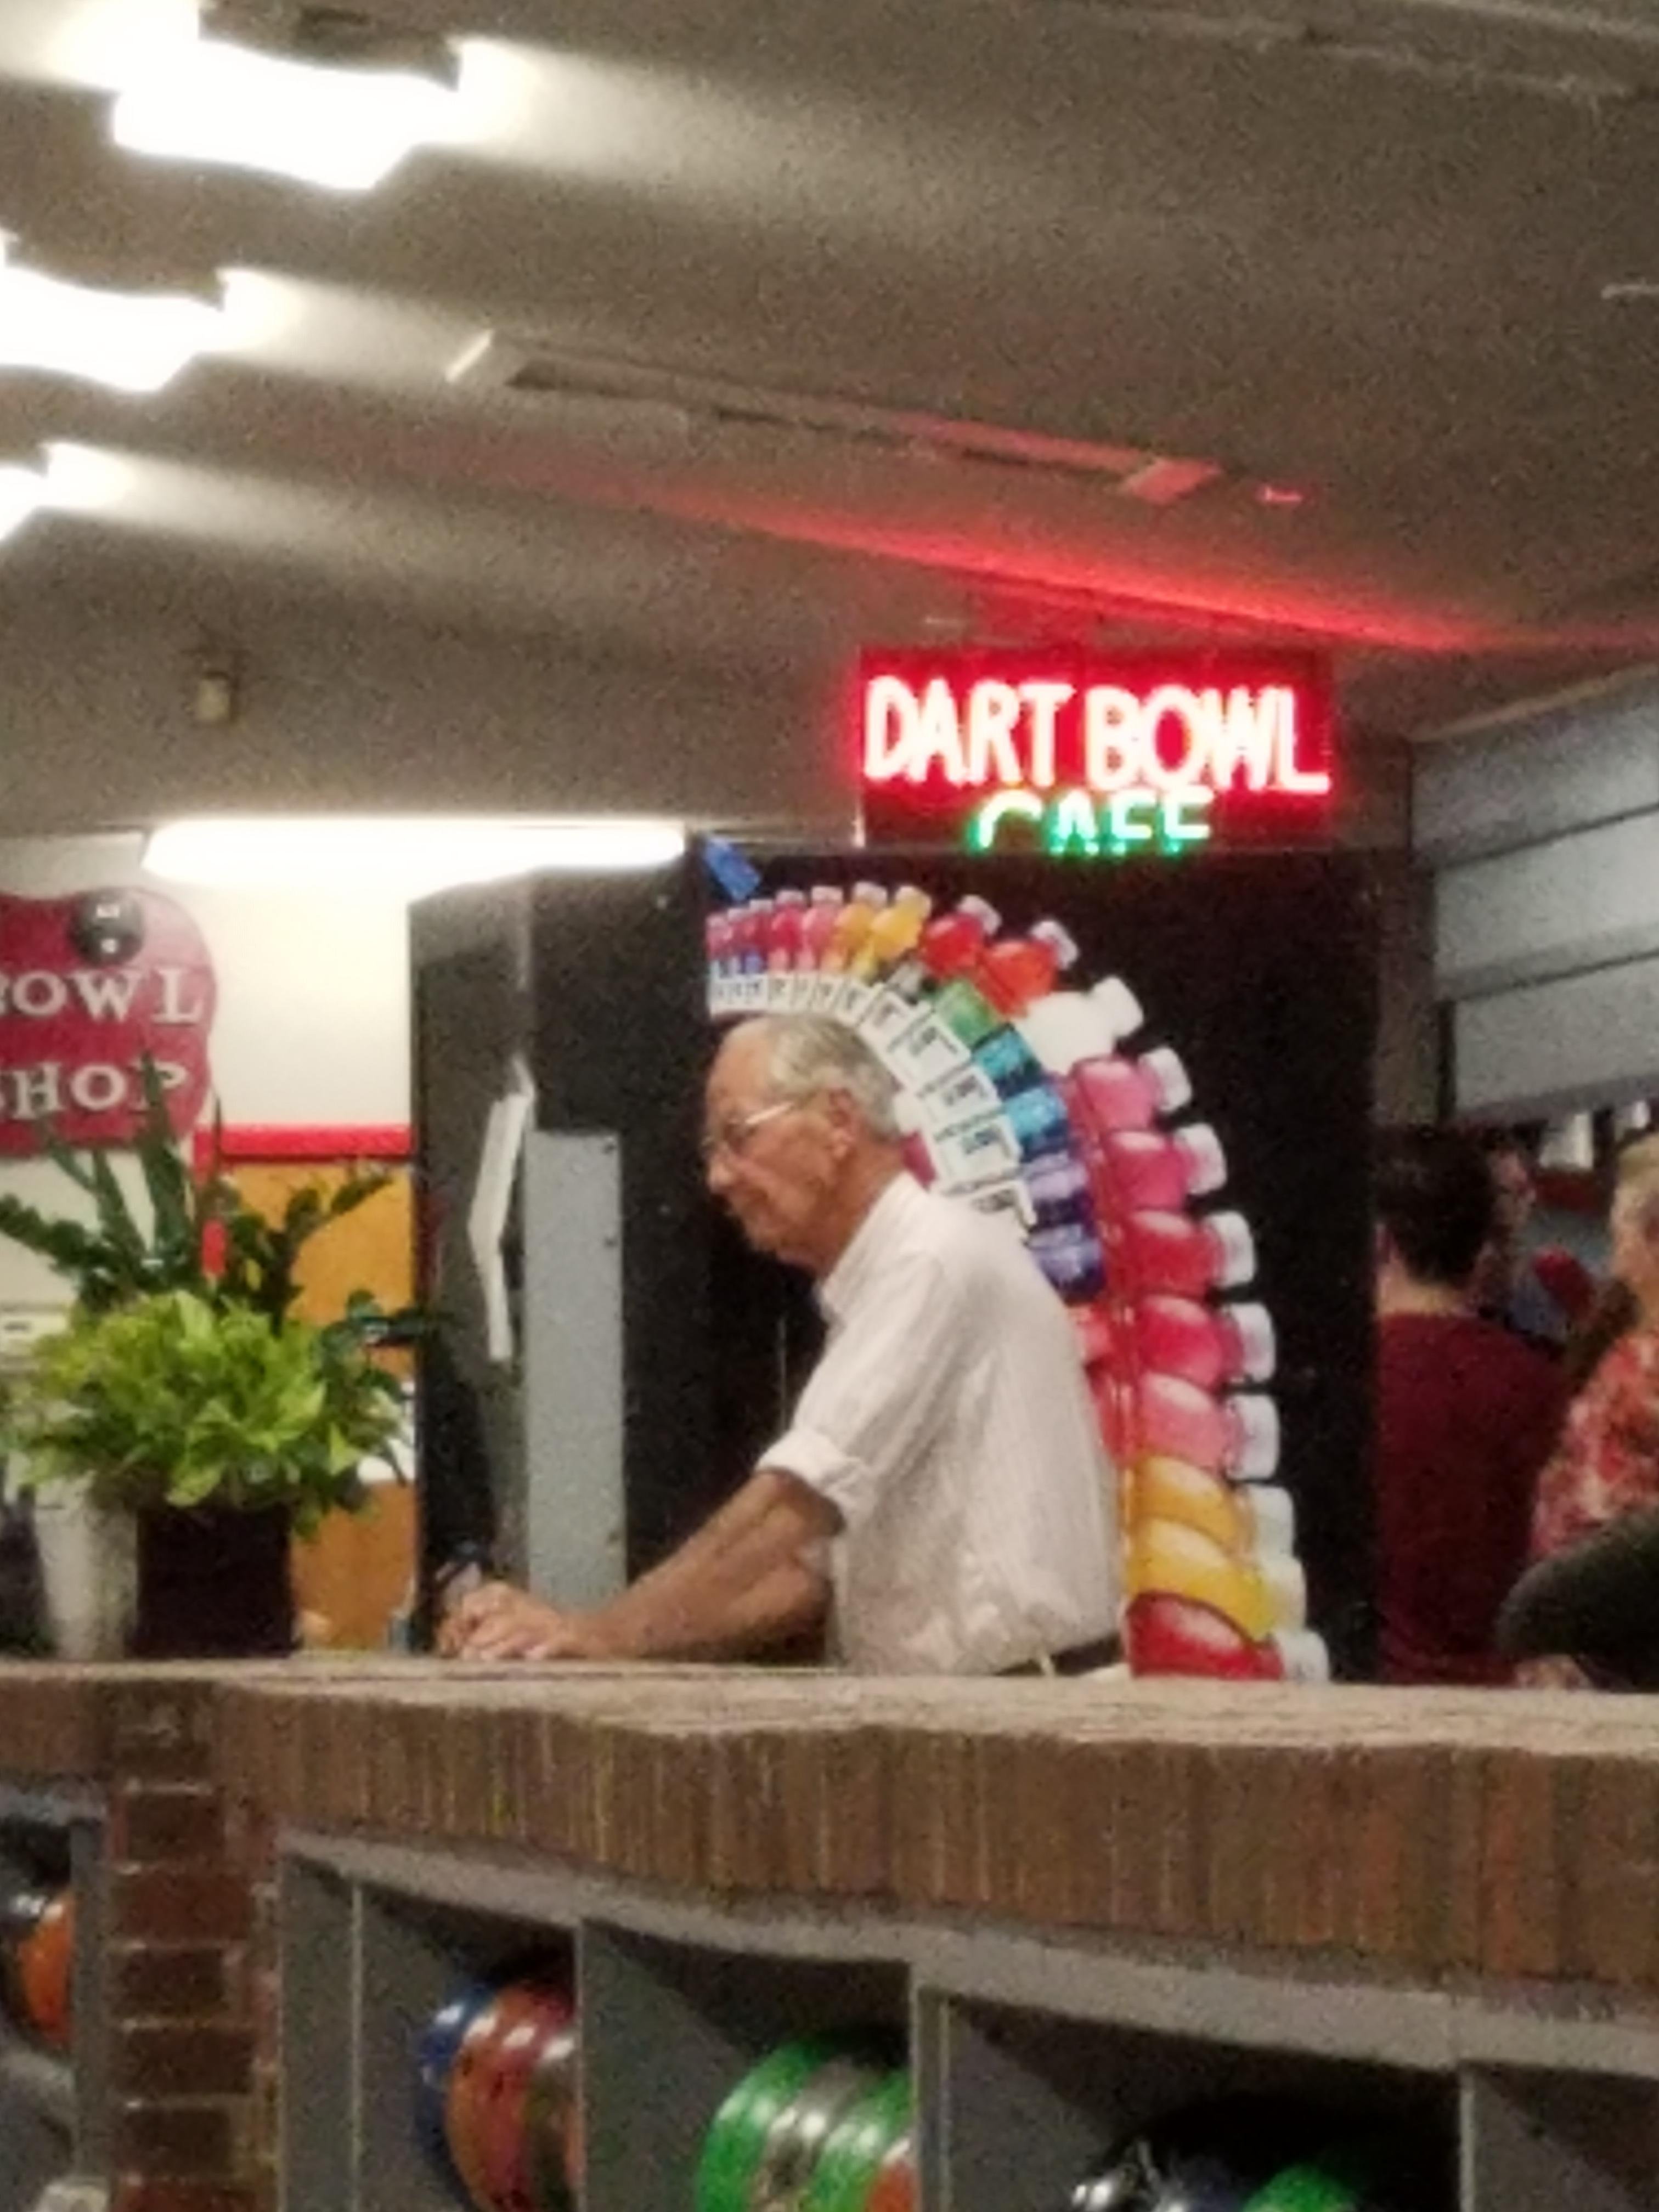 Old man at the counter in front of a vending machine that makes it look like he is wearing an awesome Indian head-dress of Gatorade instead of feathers.